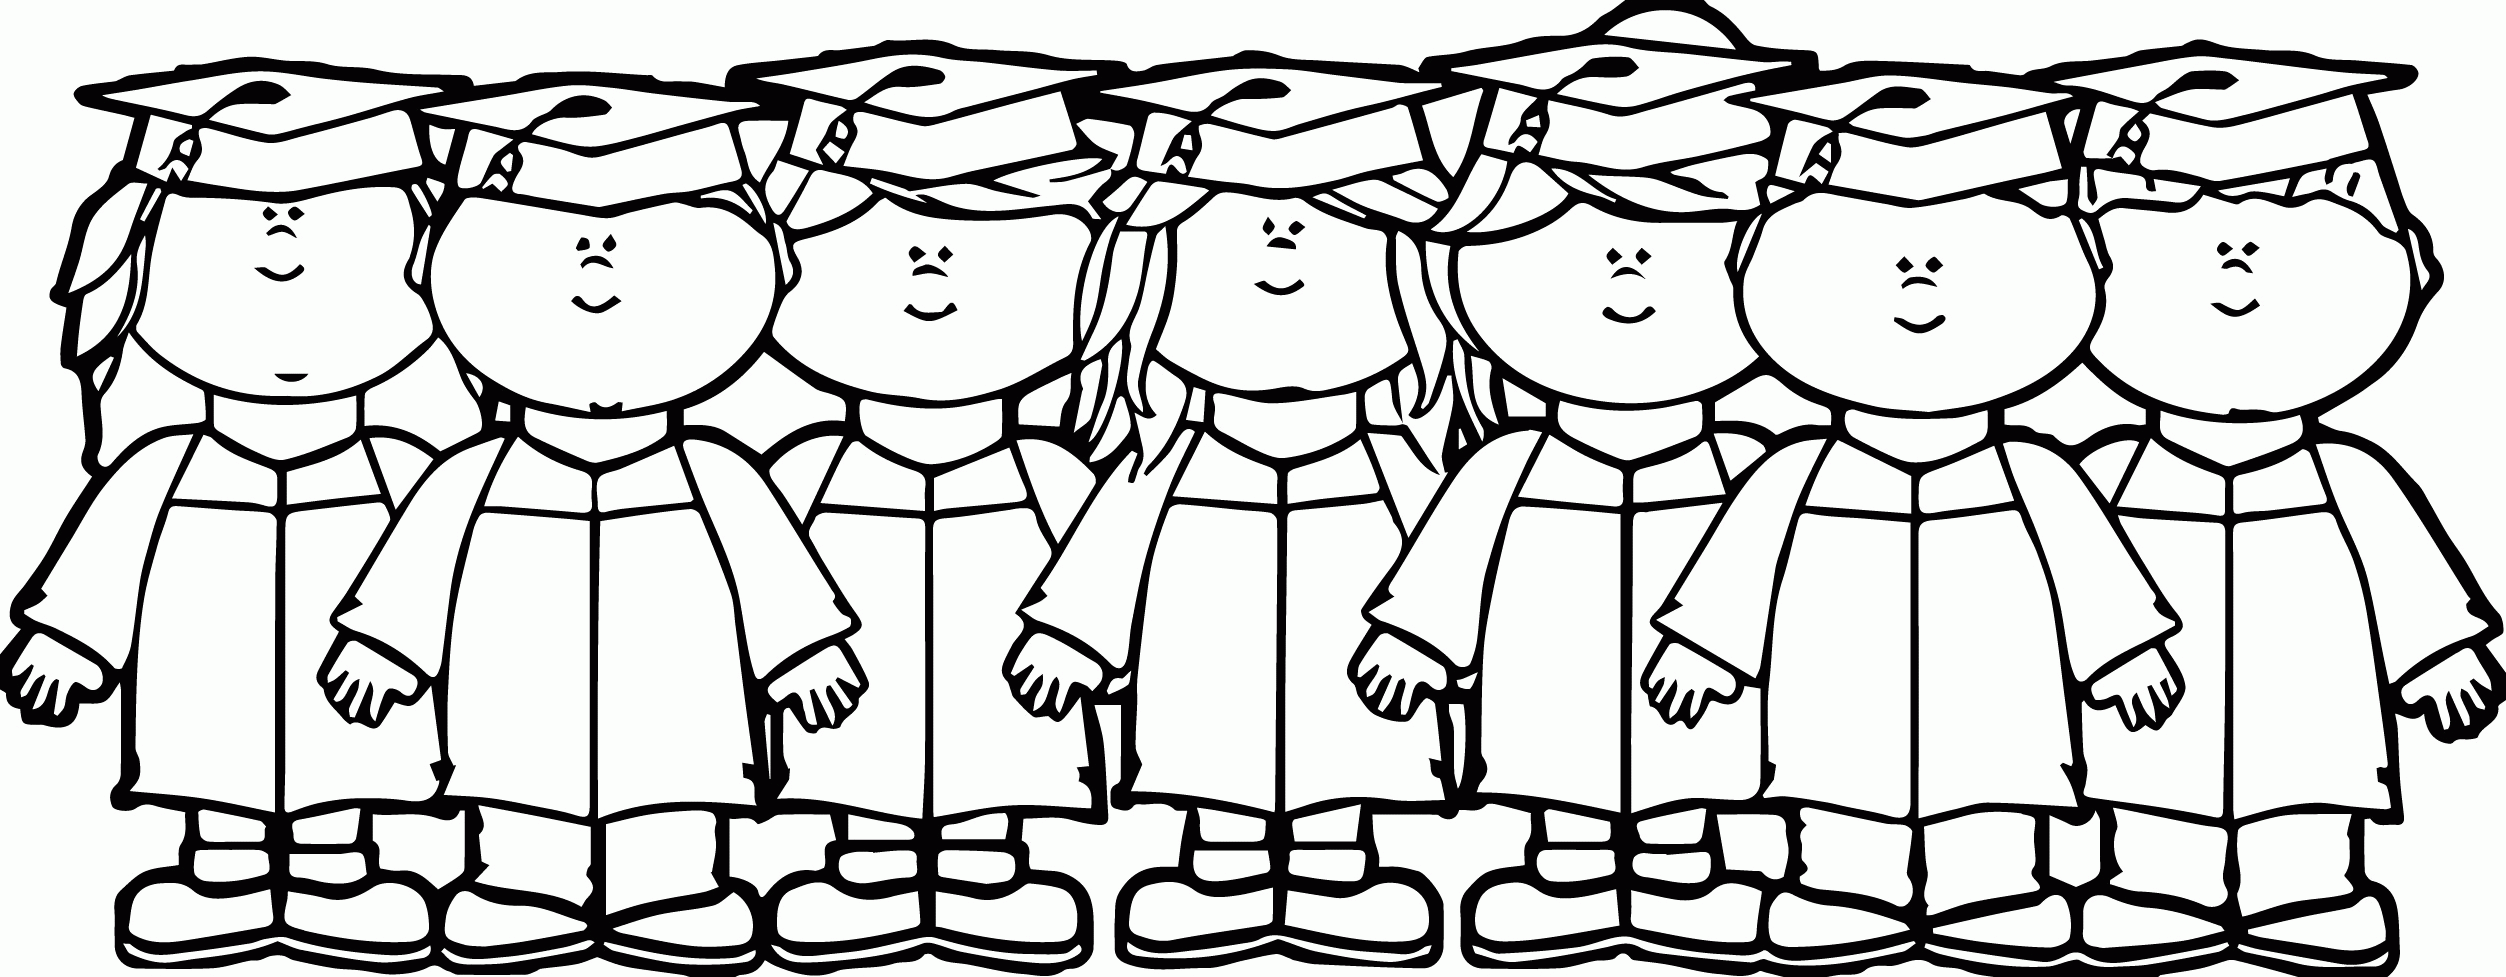 Preschoolers Graduation Coloring Pages To Download And Print For ...